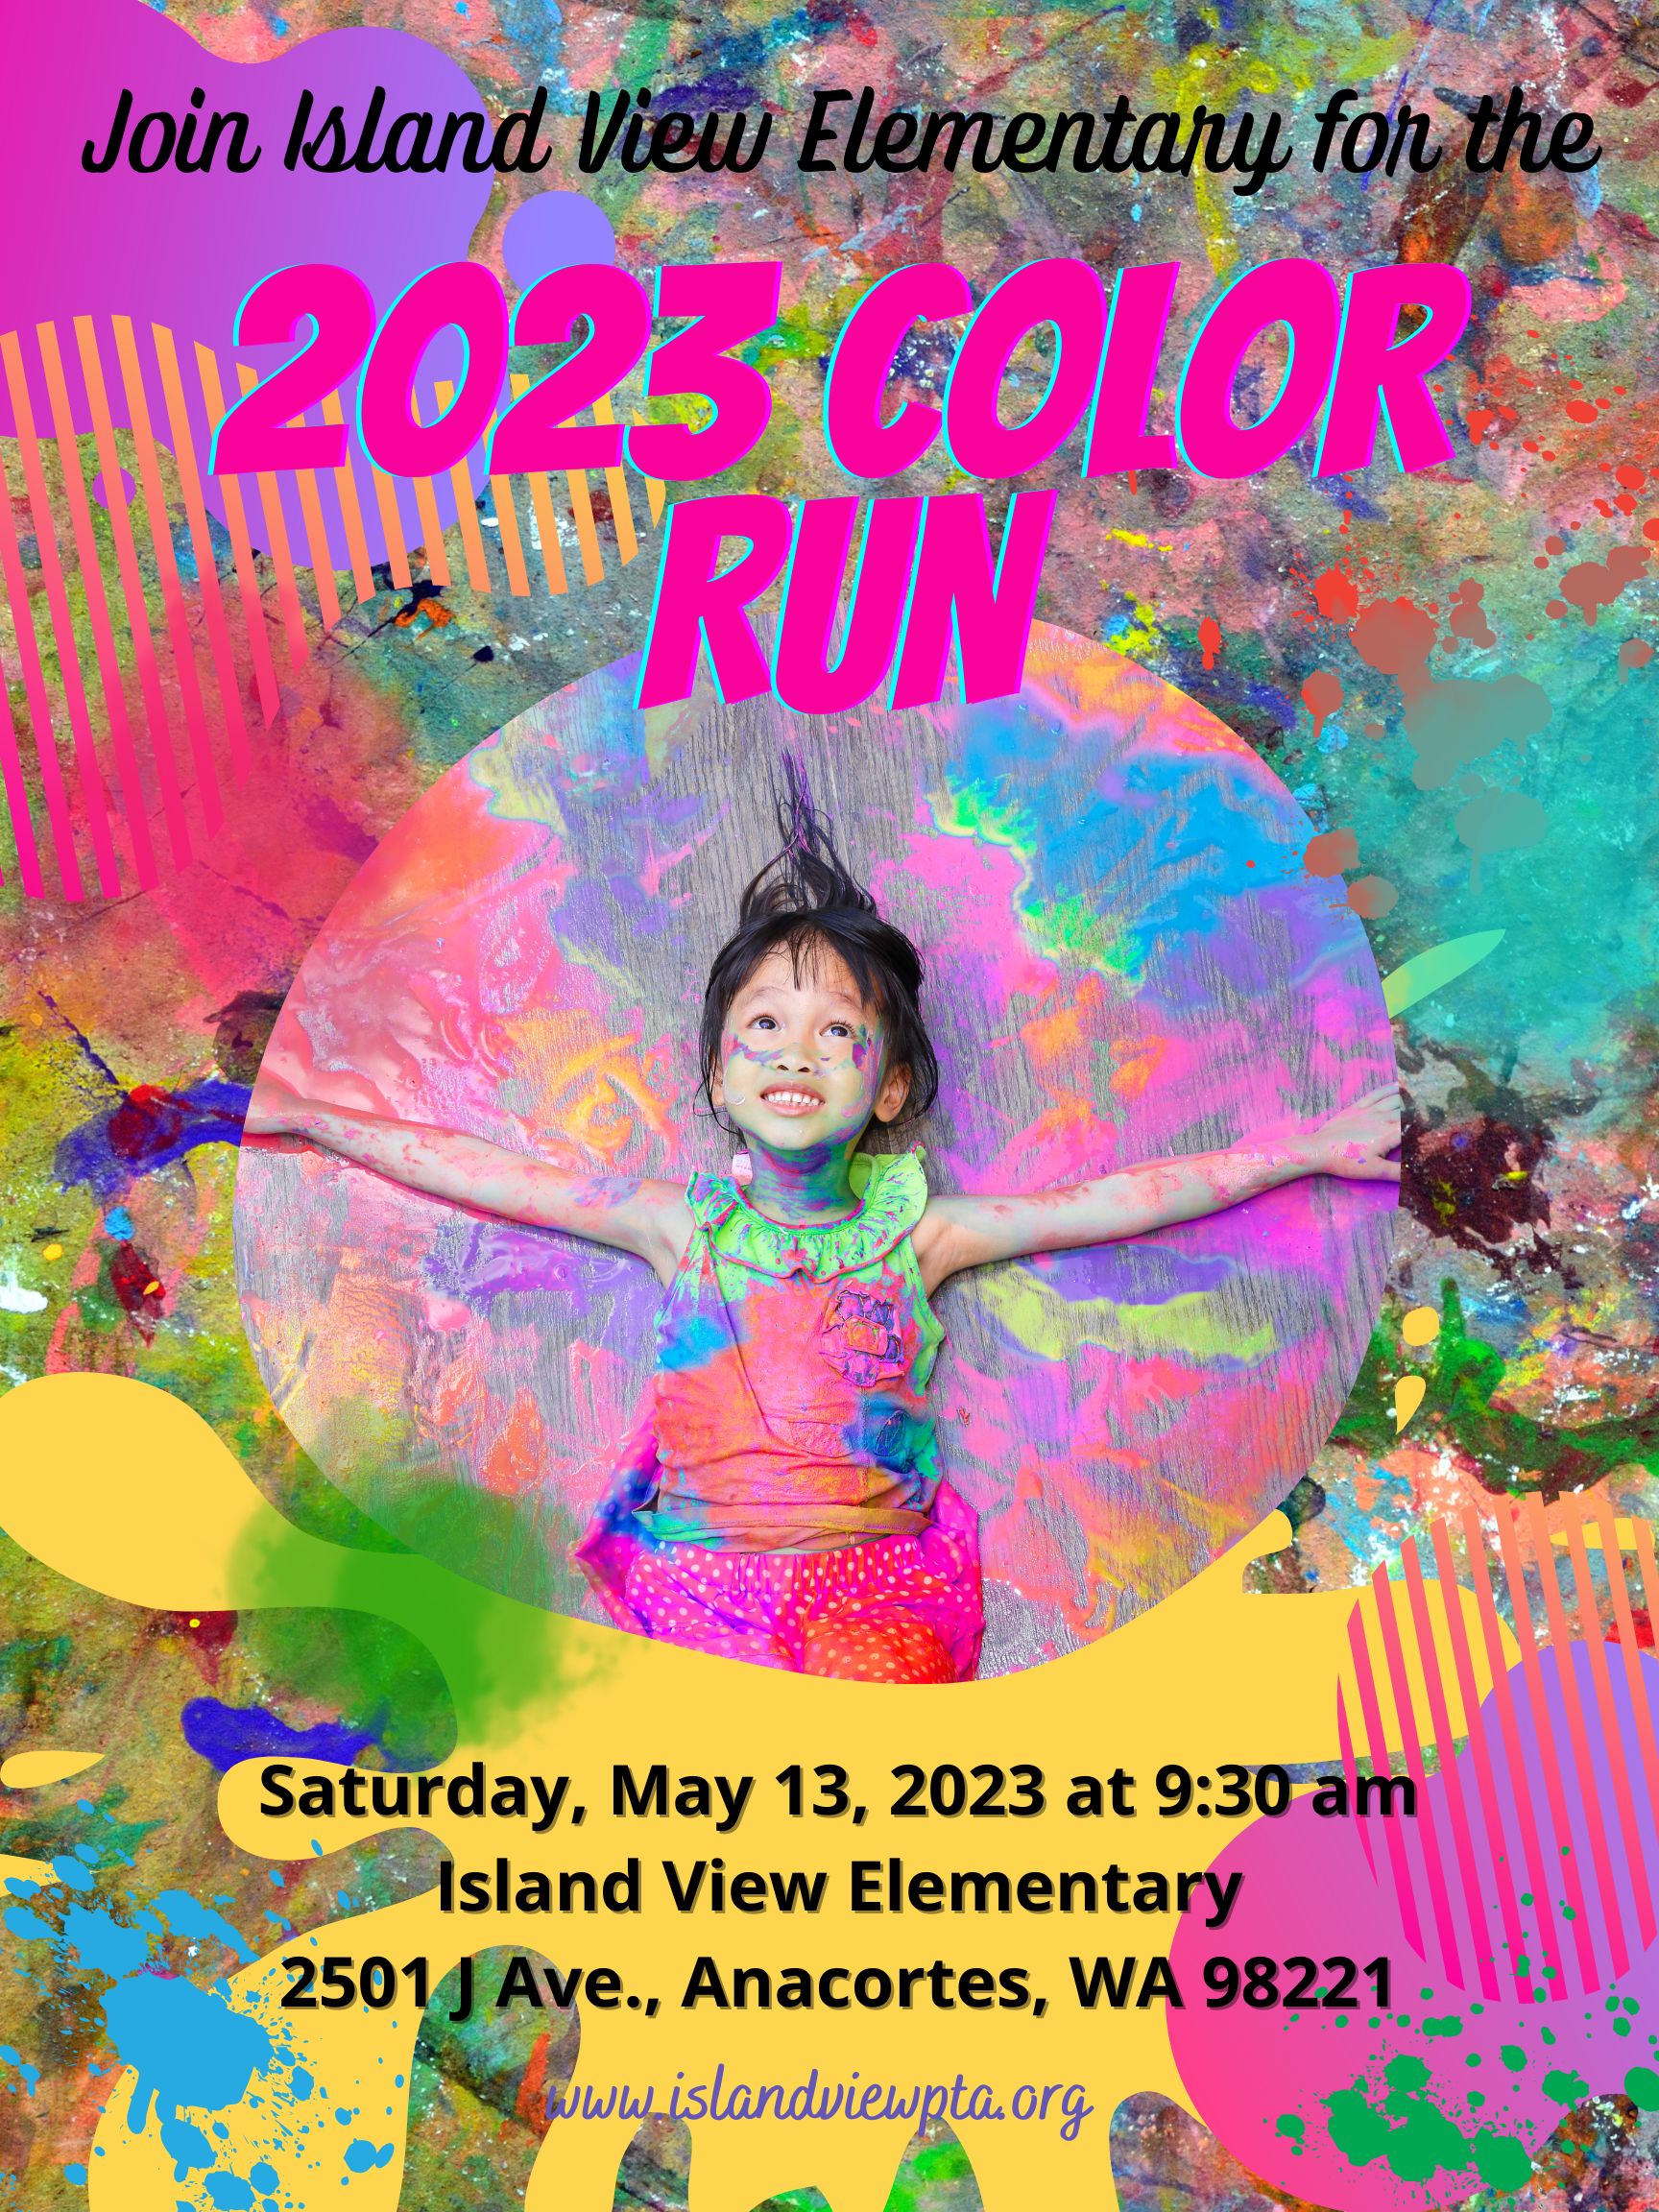 May/June 2023 Newsletter - Color My Life, Inc